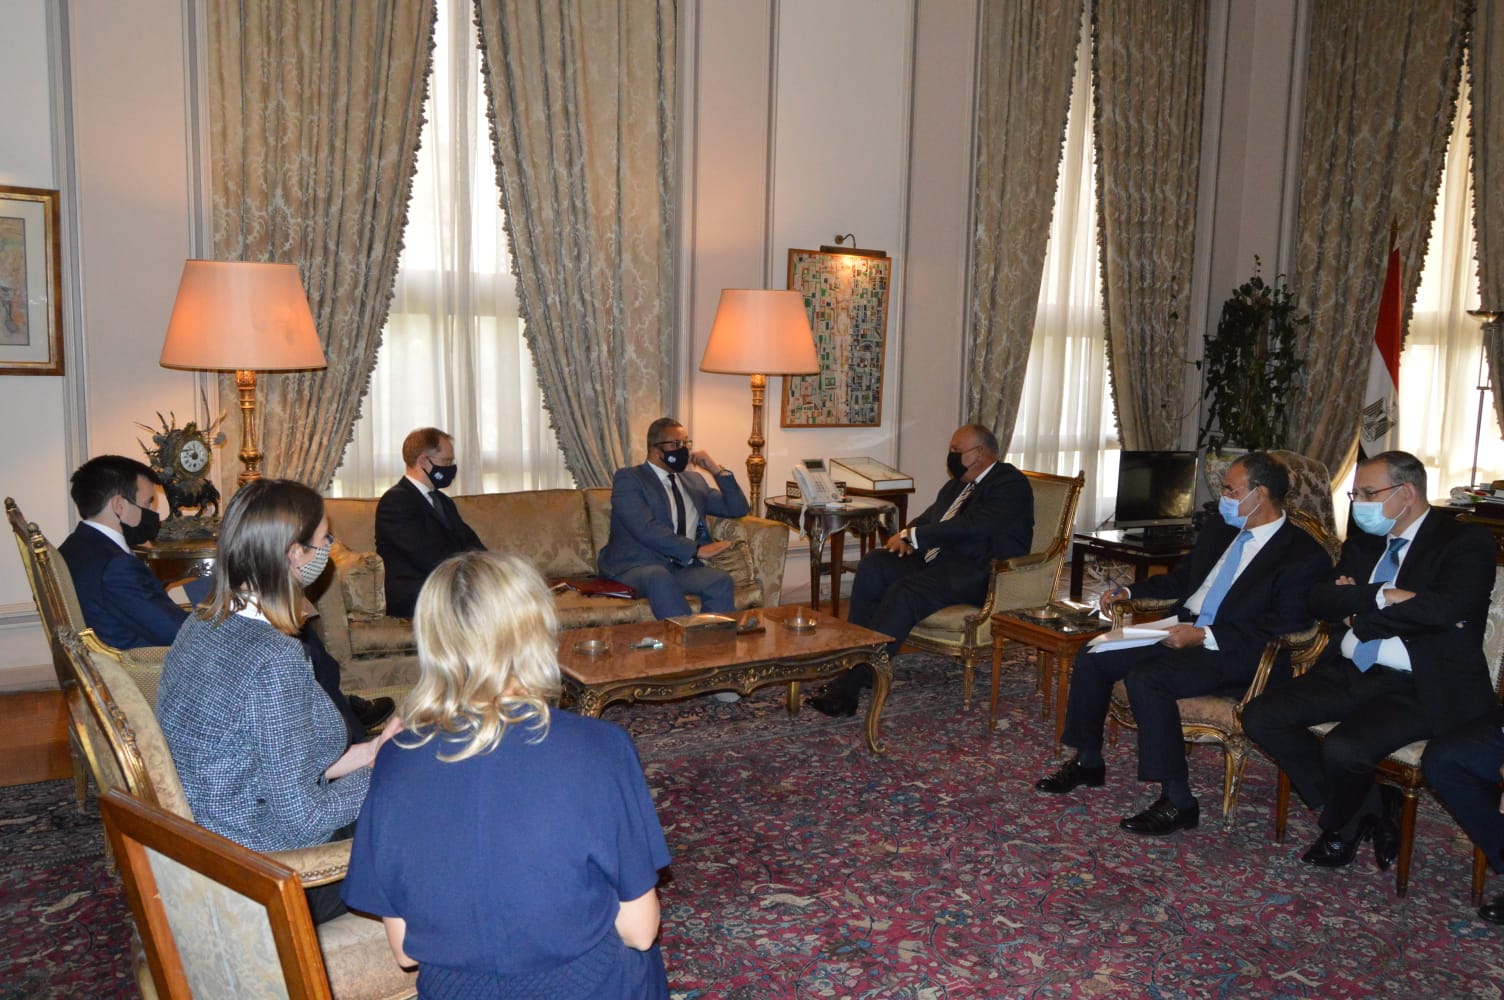 Meeting of Minister of Foreign Affairs Sameh Shokry and UK Minister of State for the Middle East and North Africa James Cleverly in Cairo, Egypt on October 17, 2021. Press Photo